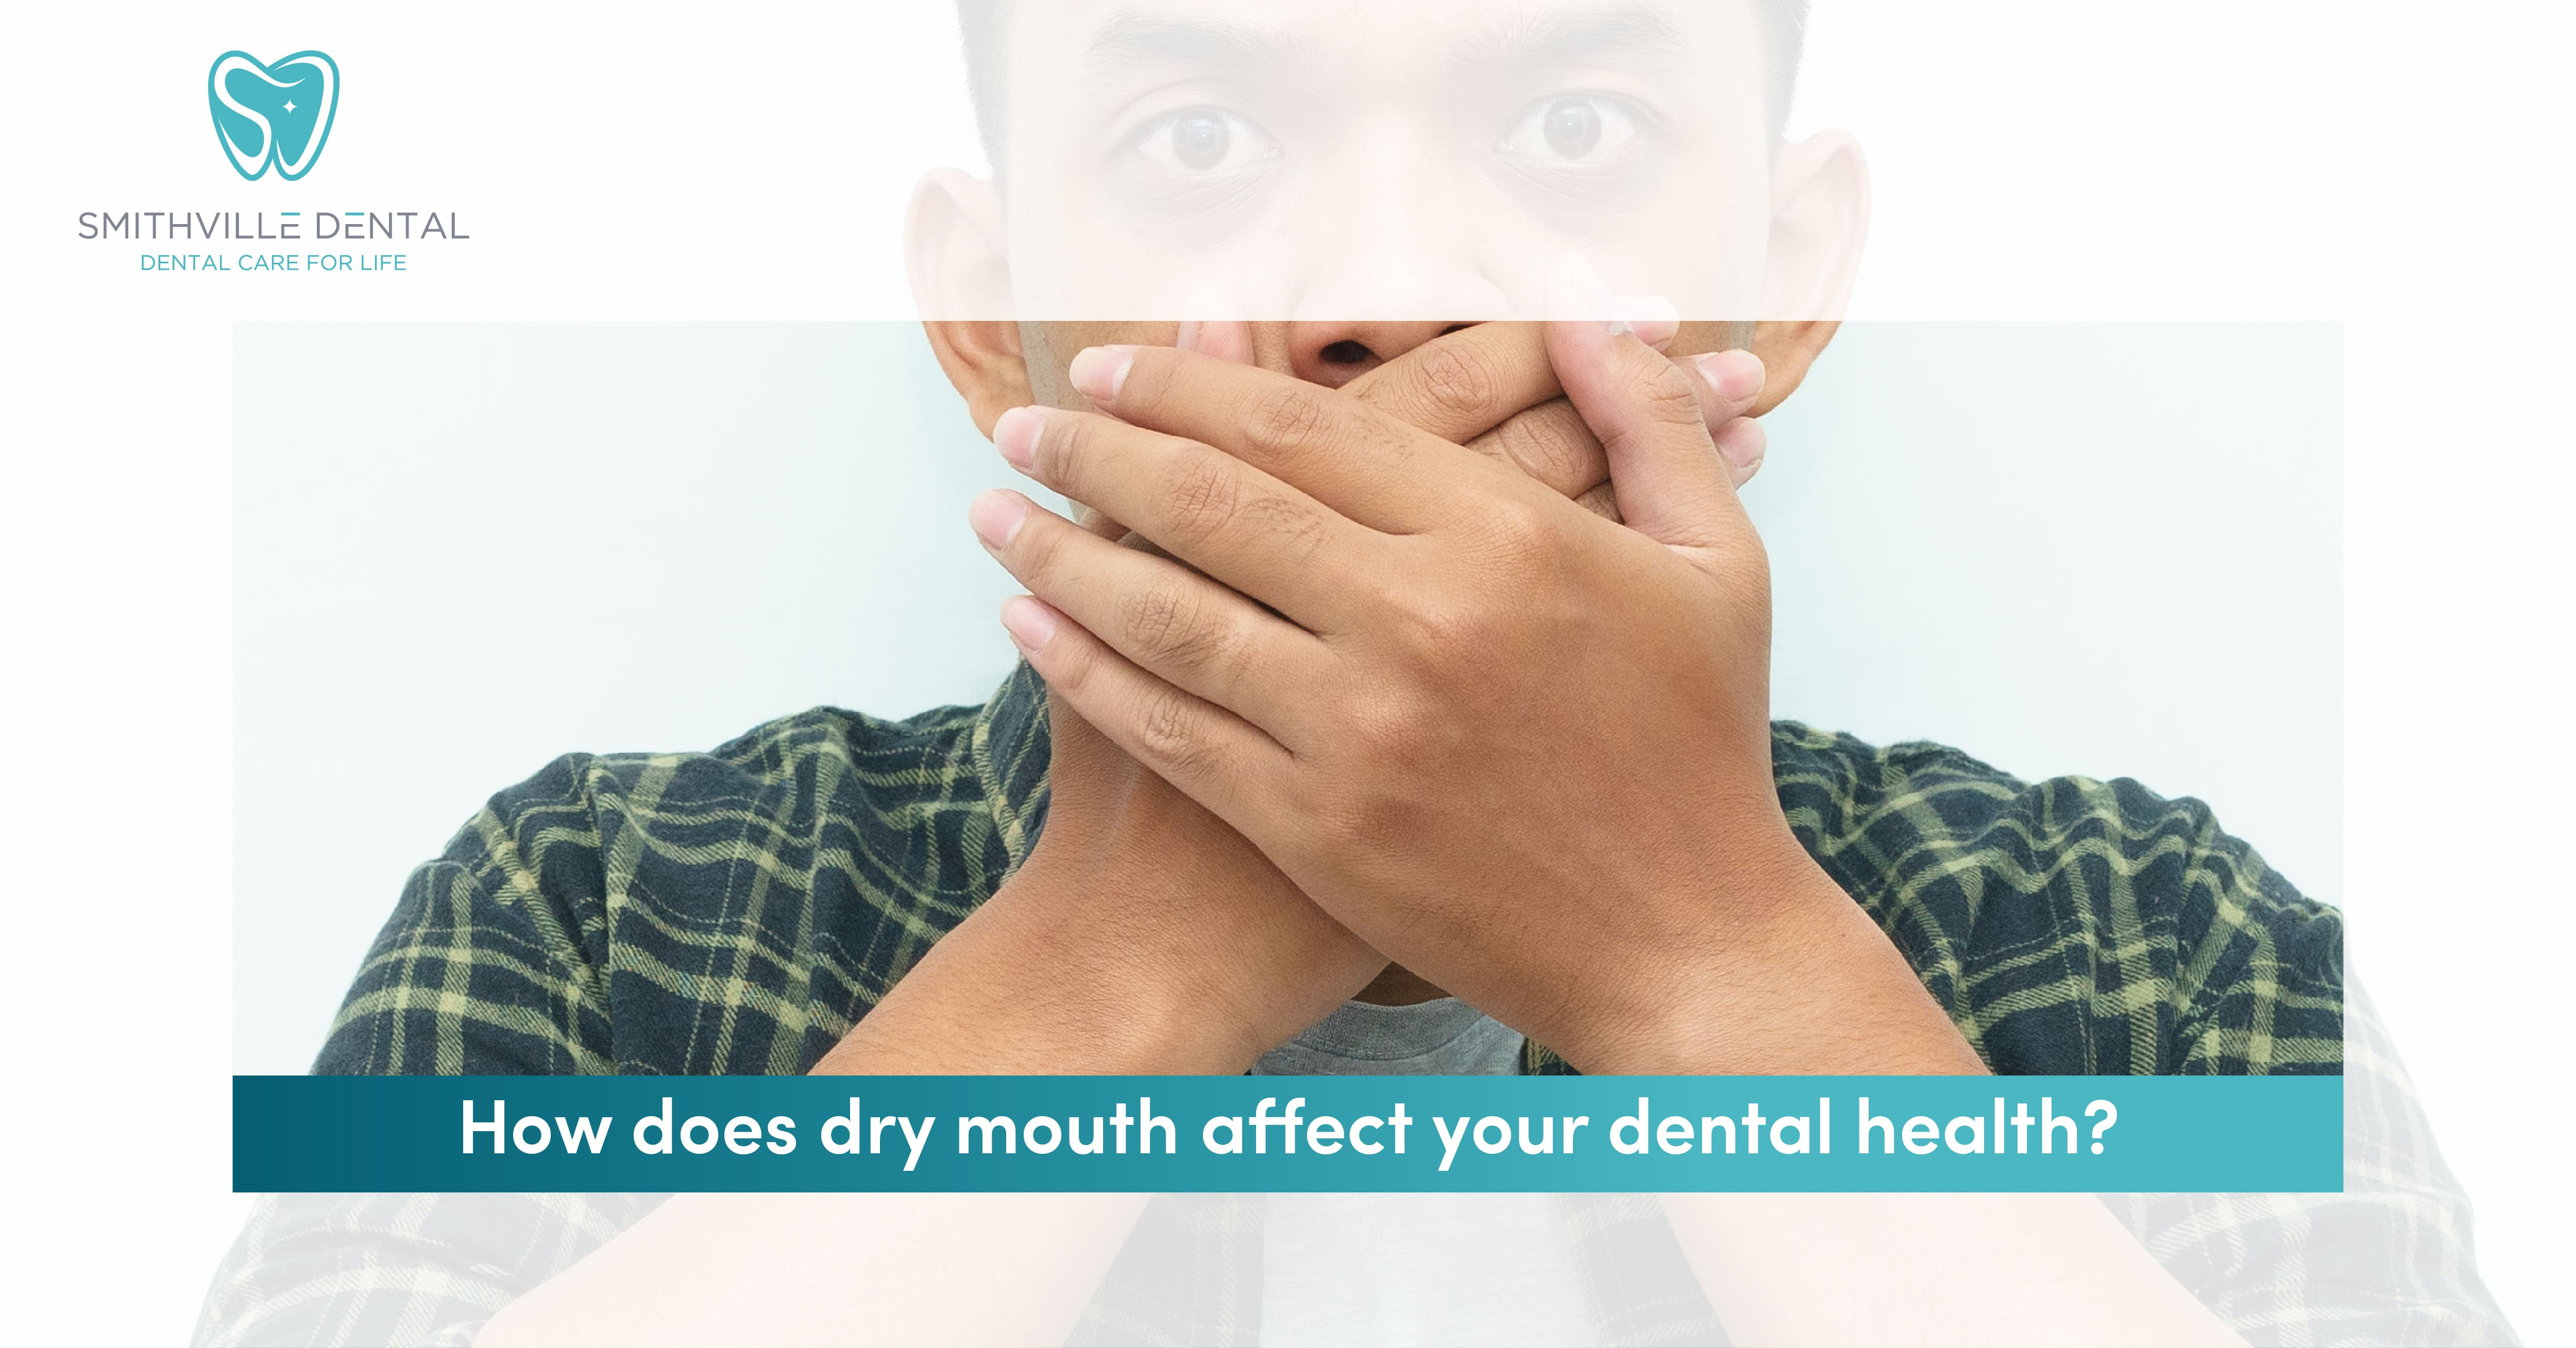 How does dry mouth affect your dental health?